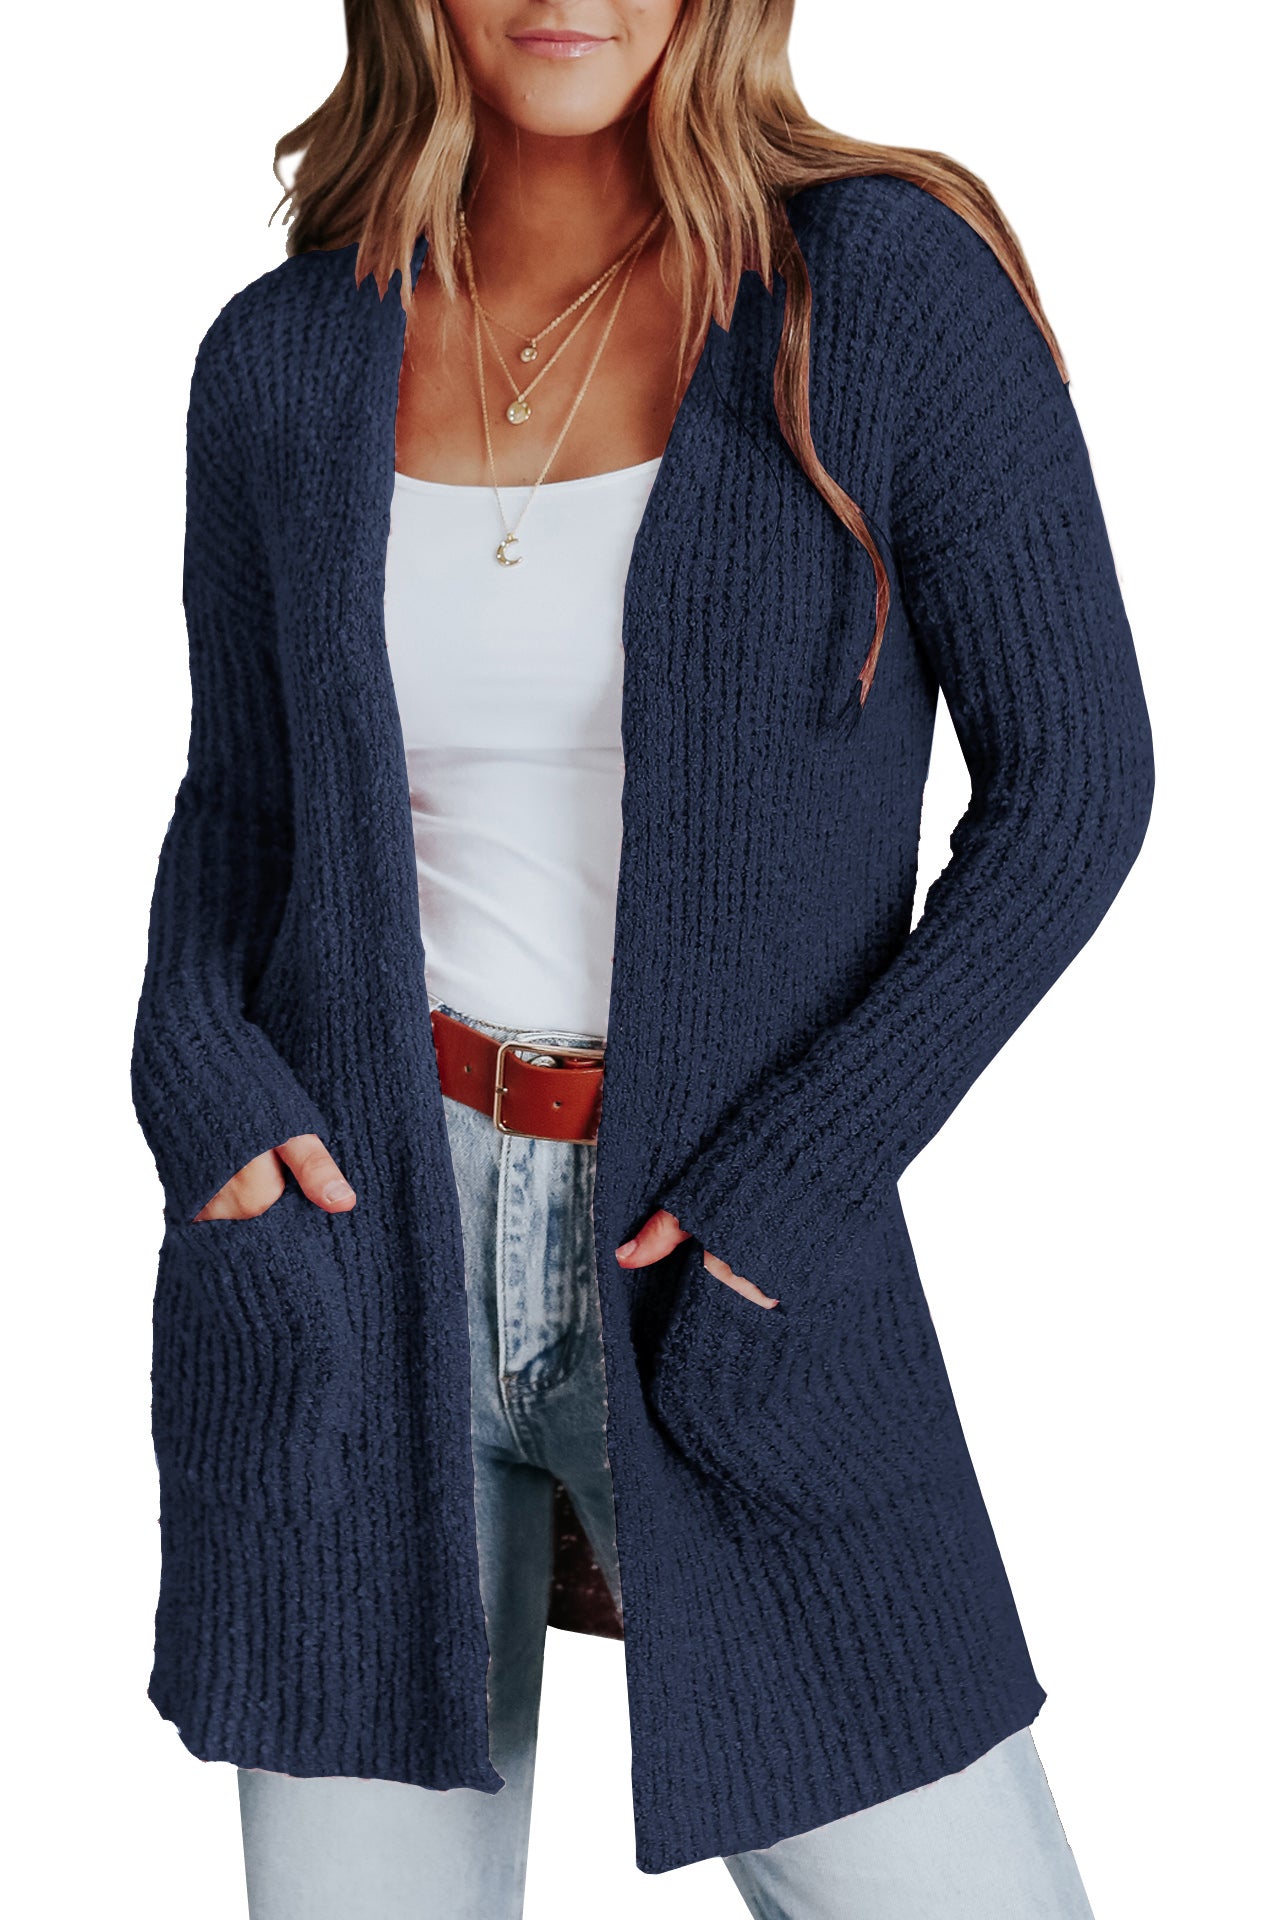 Women's Long Sleeve Cardigan Knit Jacket with Pockets